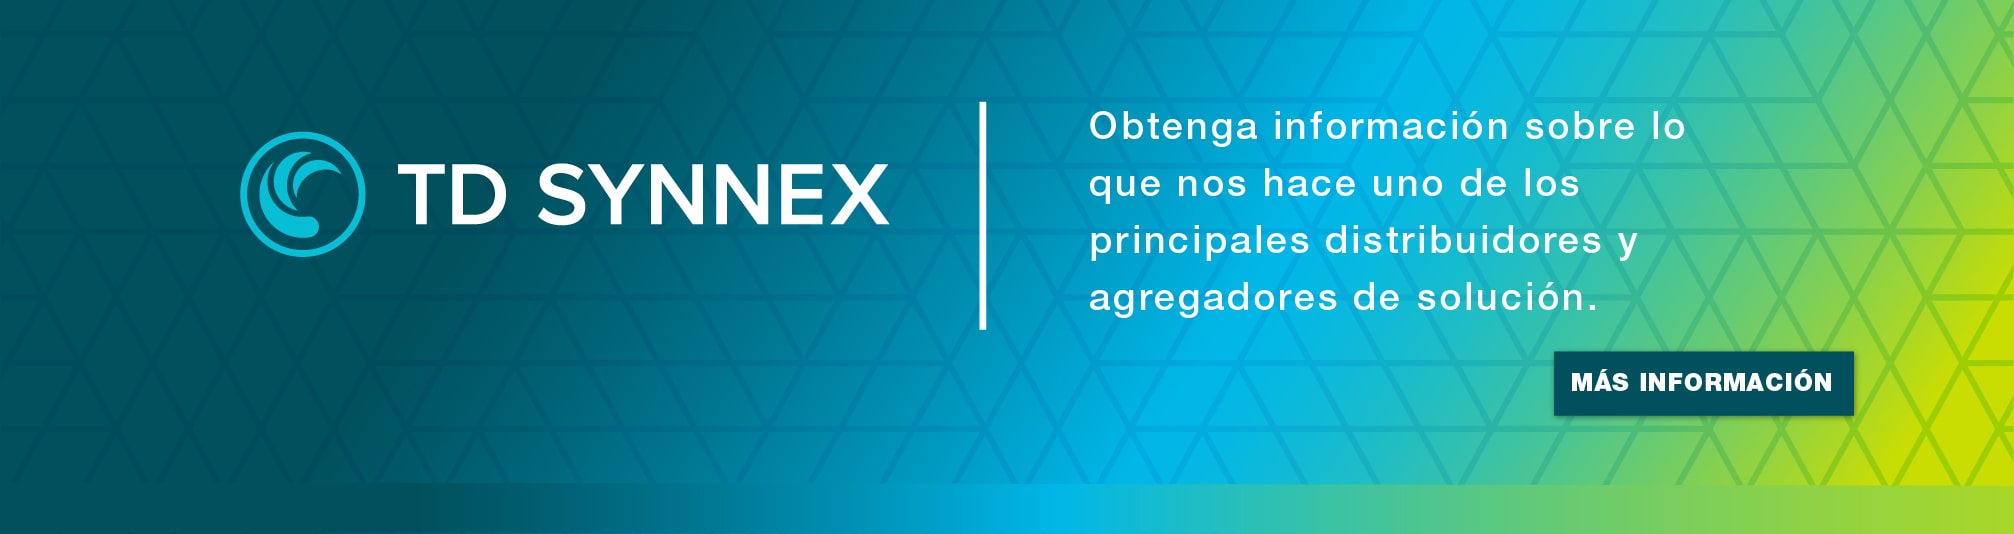  TD SYNNEX EXPRESS Colombia - TD SYNNEX about us